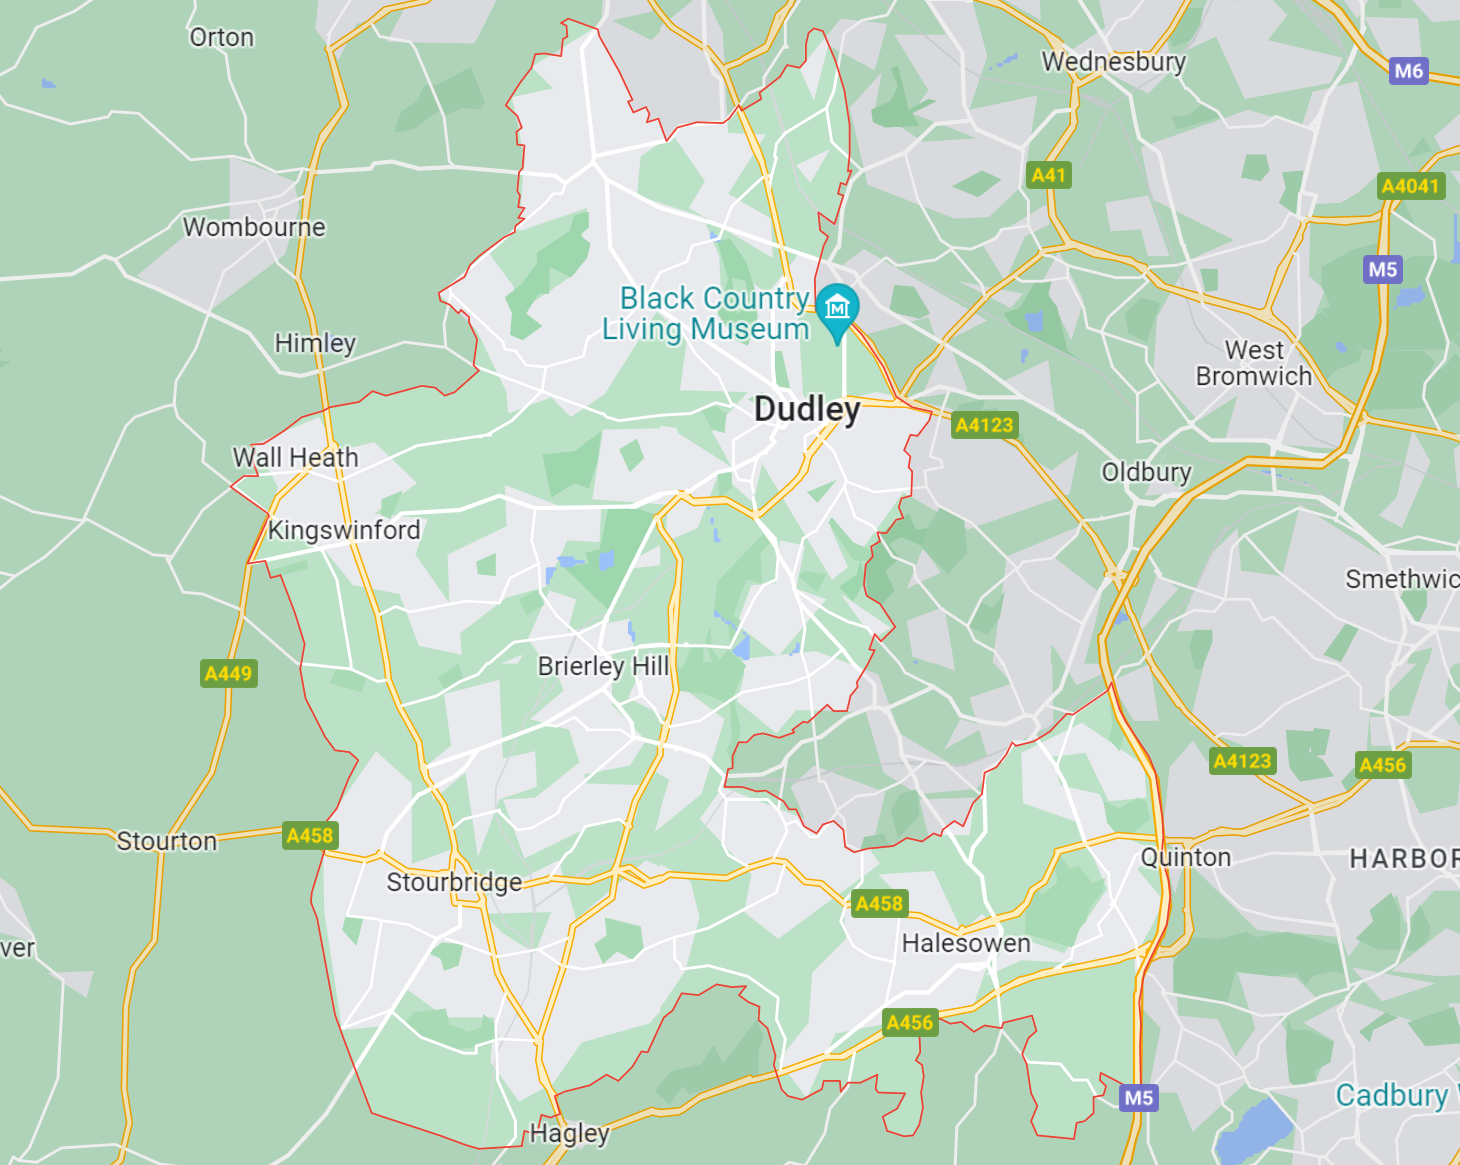 Map of Healthwatch Dudley area